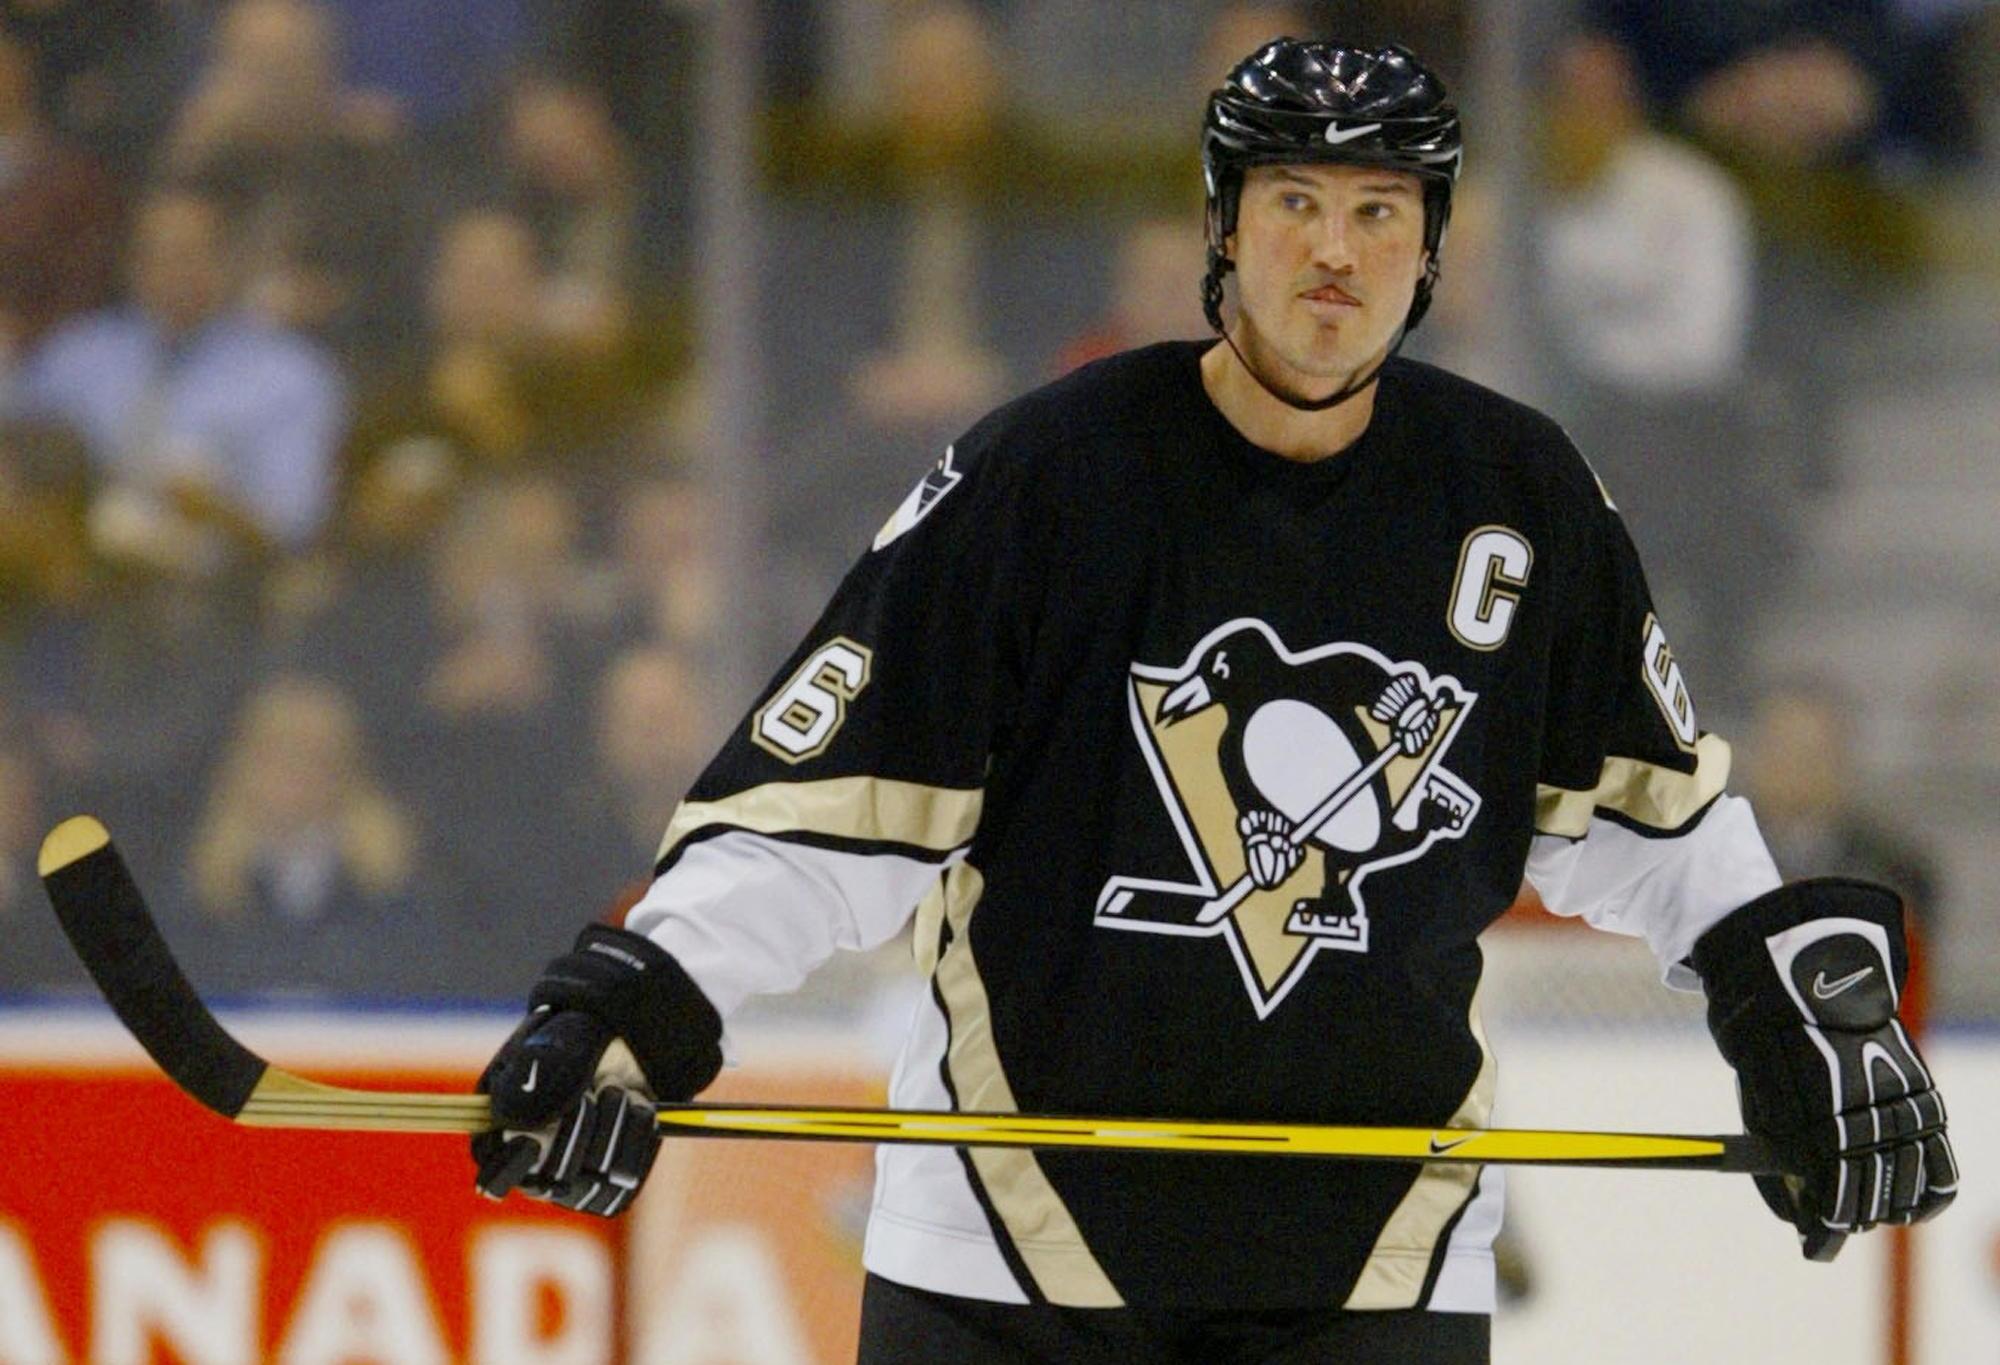 Top 10 Best Hockey Players of All Time 